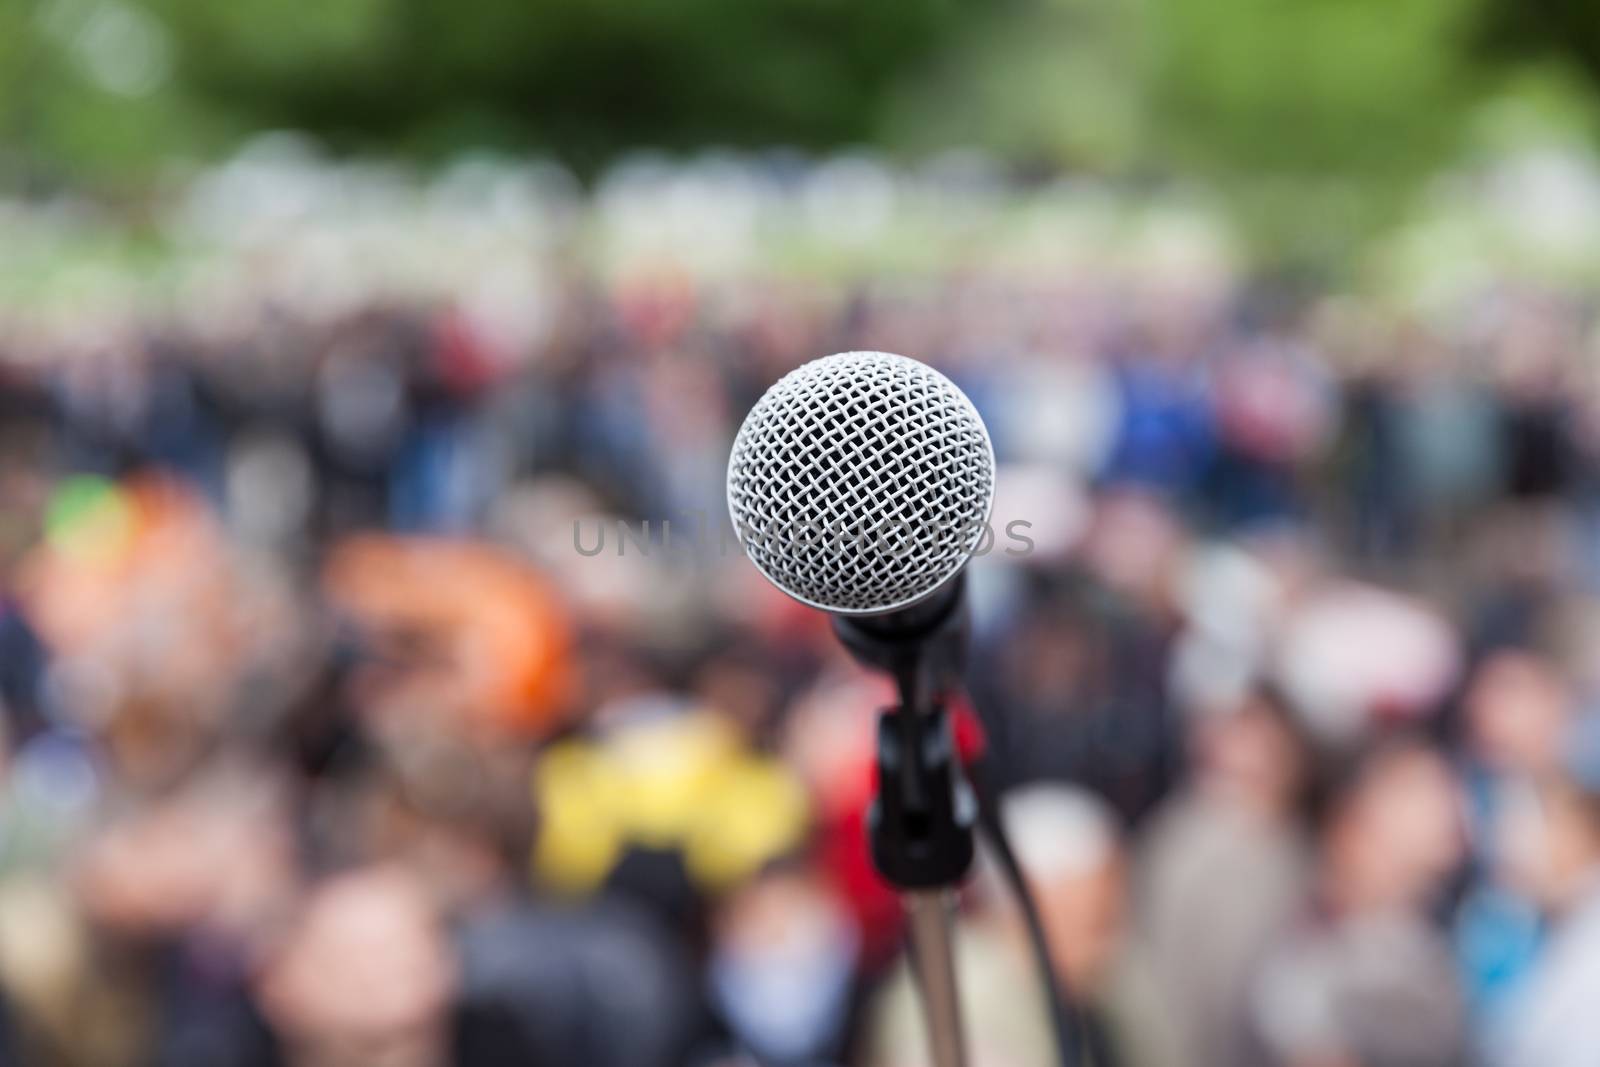 Microphone in focus against blurred crowd. Demonstration.